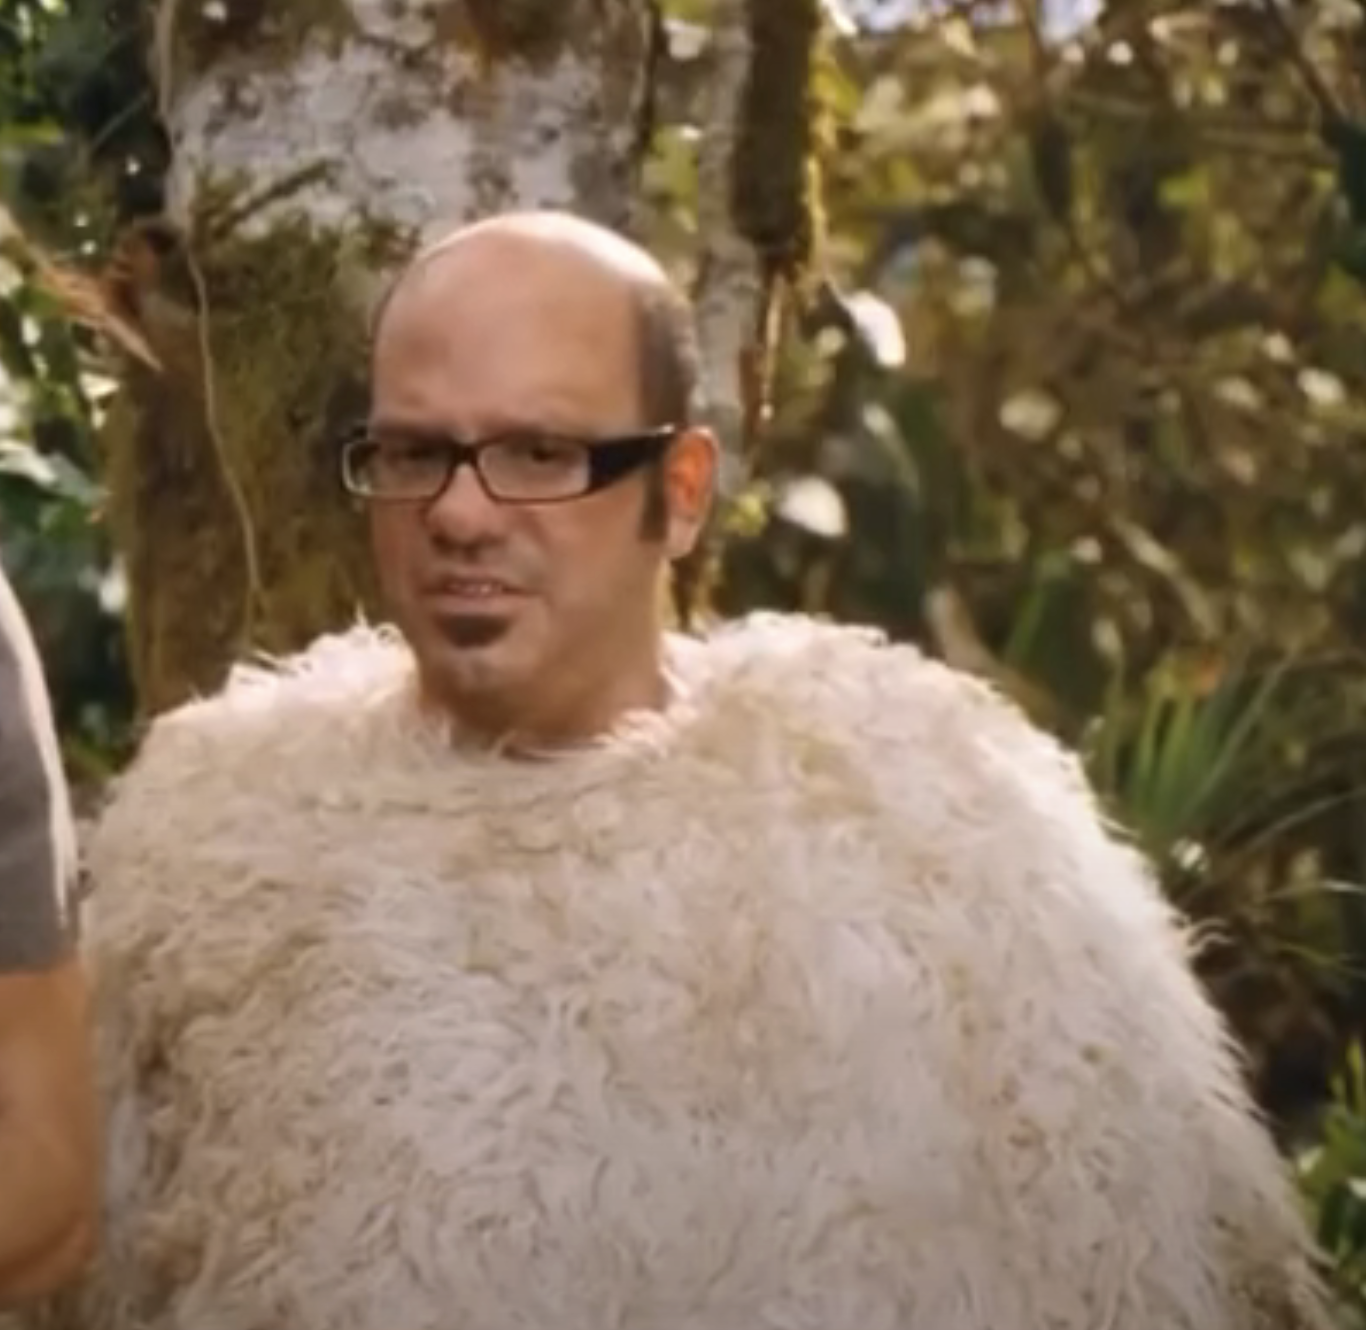 in a scene, David as Ian in glasses wearing a fluffy costume resembling a bird, outdoors